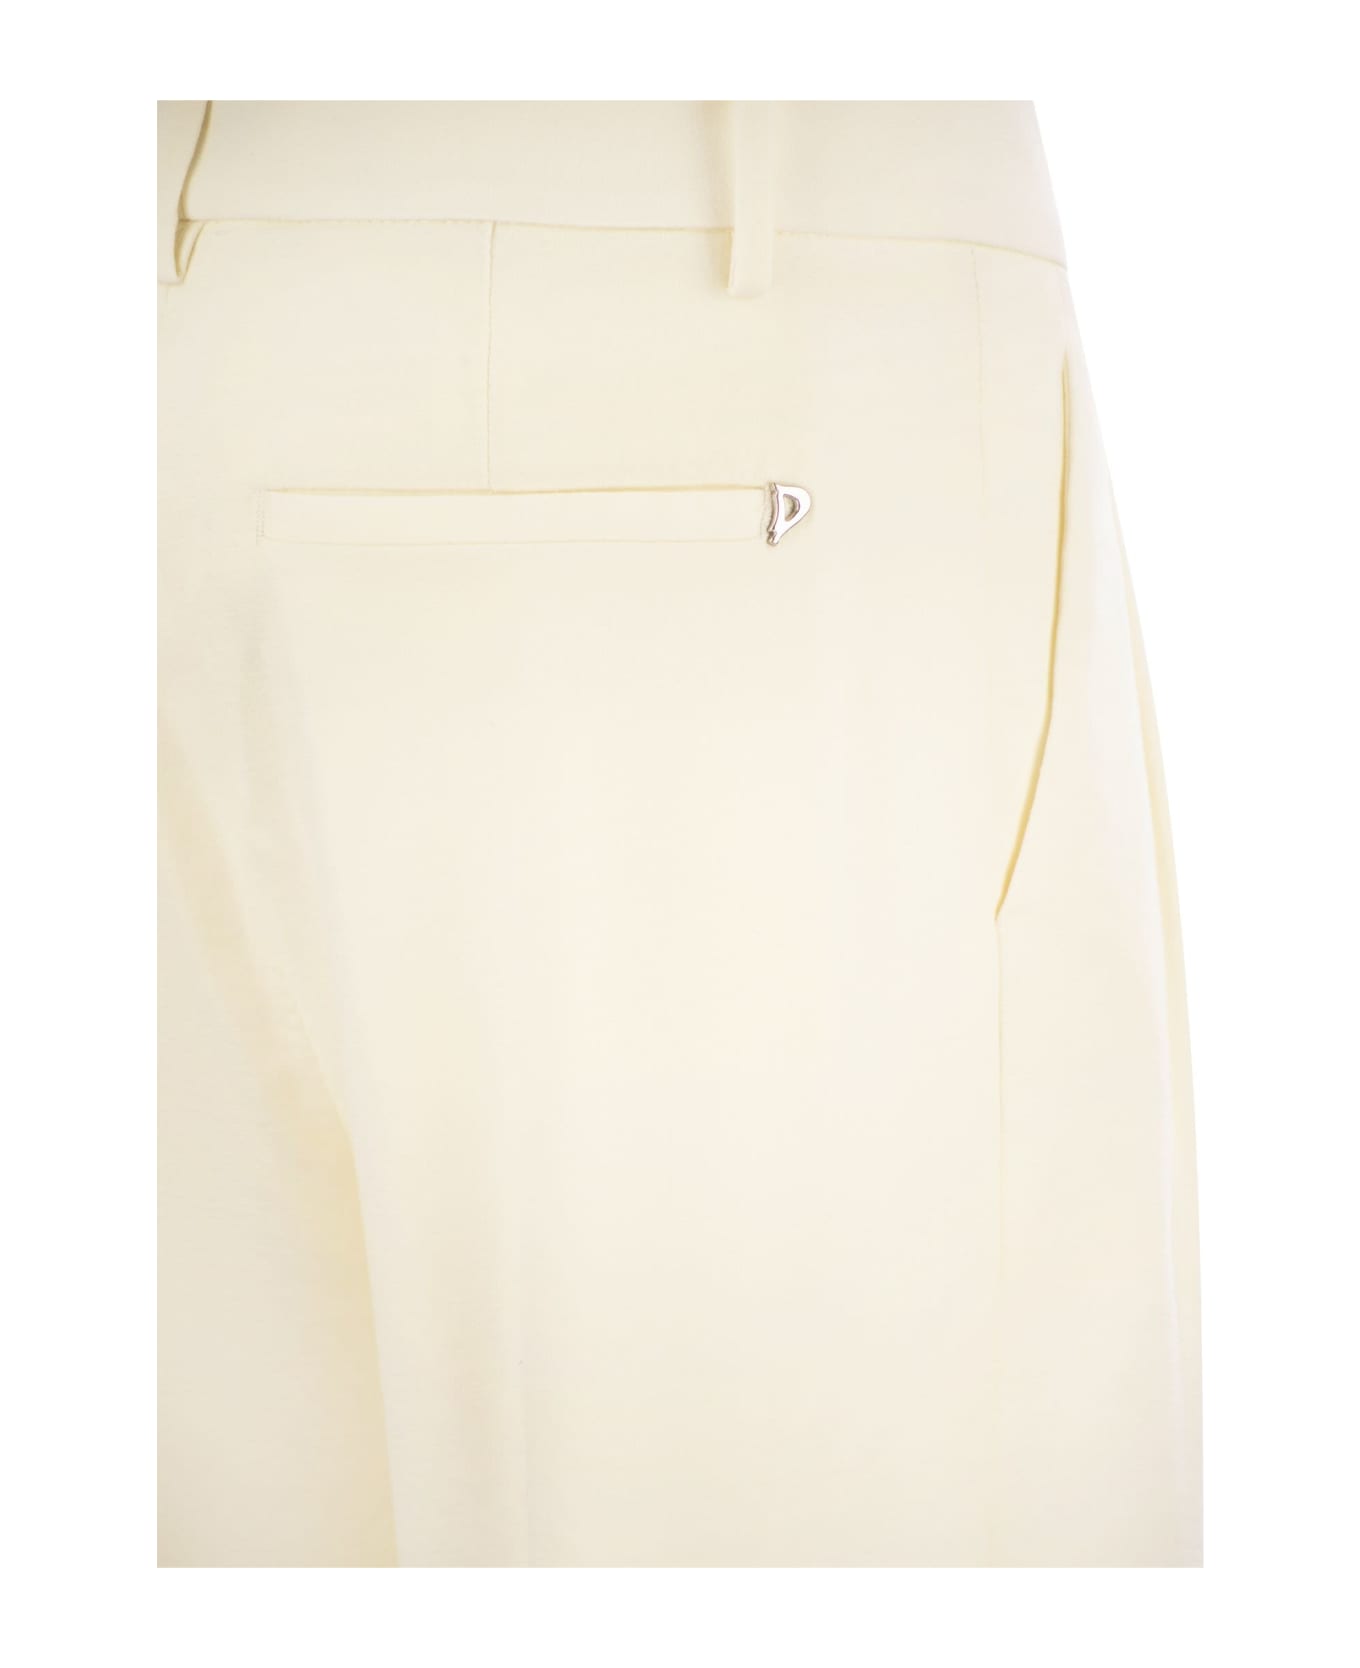 Dondup Sheryl - Loose Flannel Trousers - White